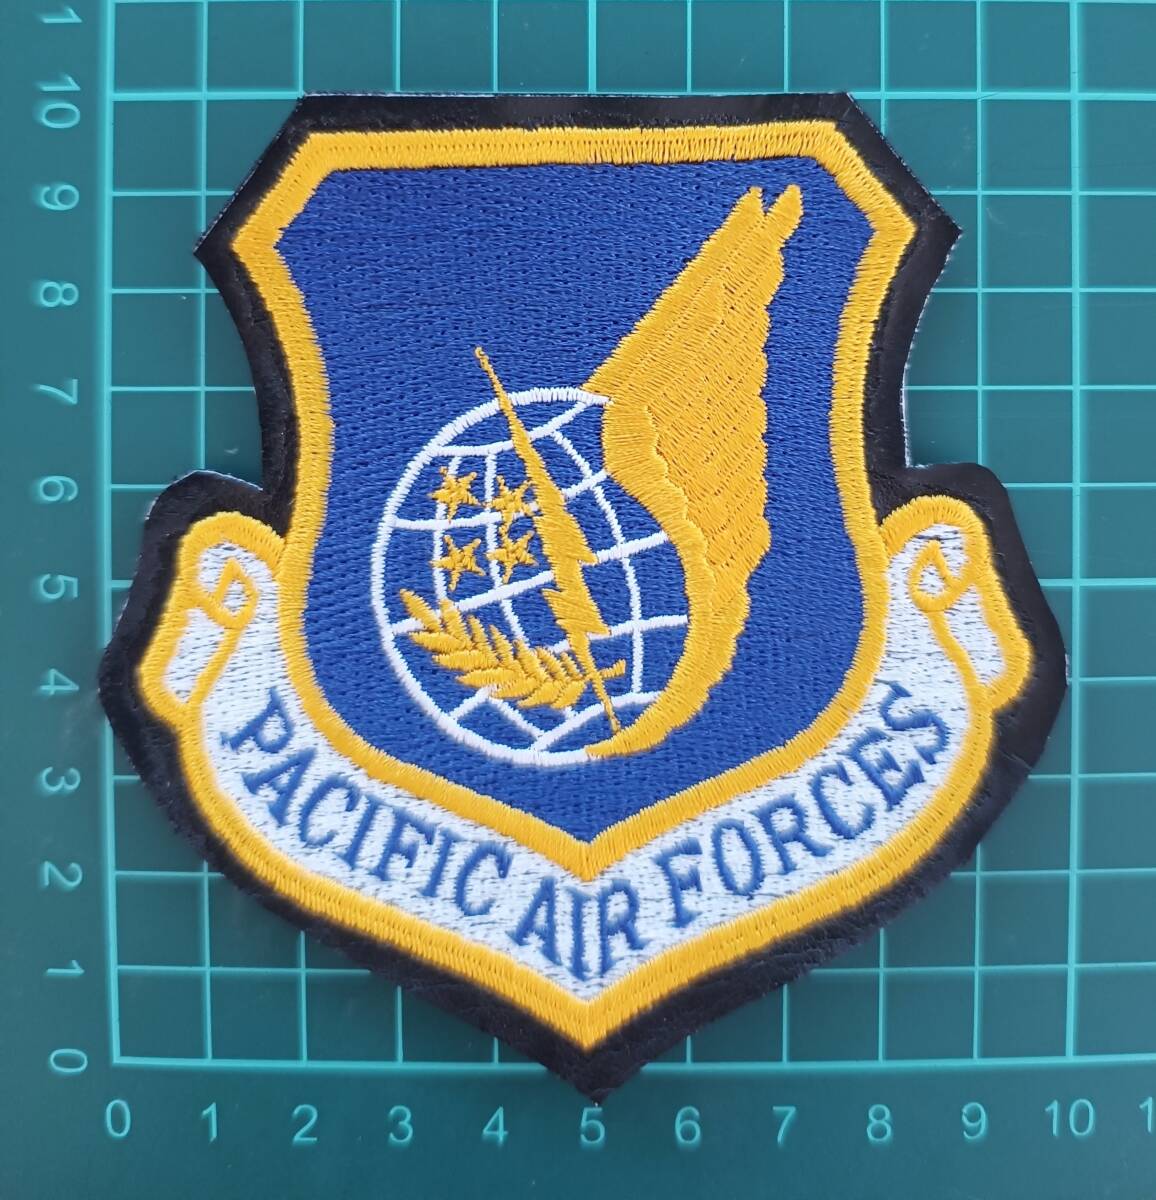 ★☆USAF★アメリカ空軍☆PACIFIC AIR FORCES★コマンド☆Command★パッチ☆PATCH★100mm X 100mm☆★の画像1